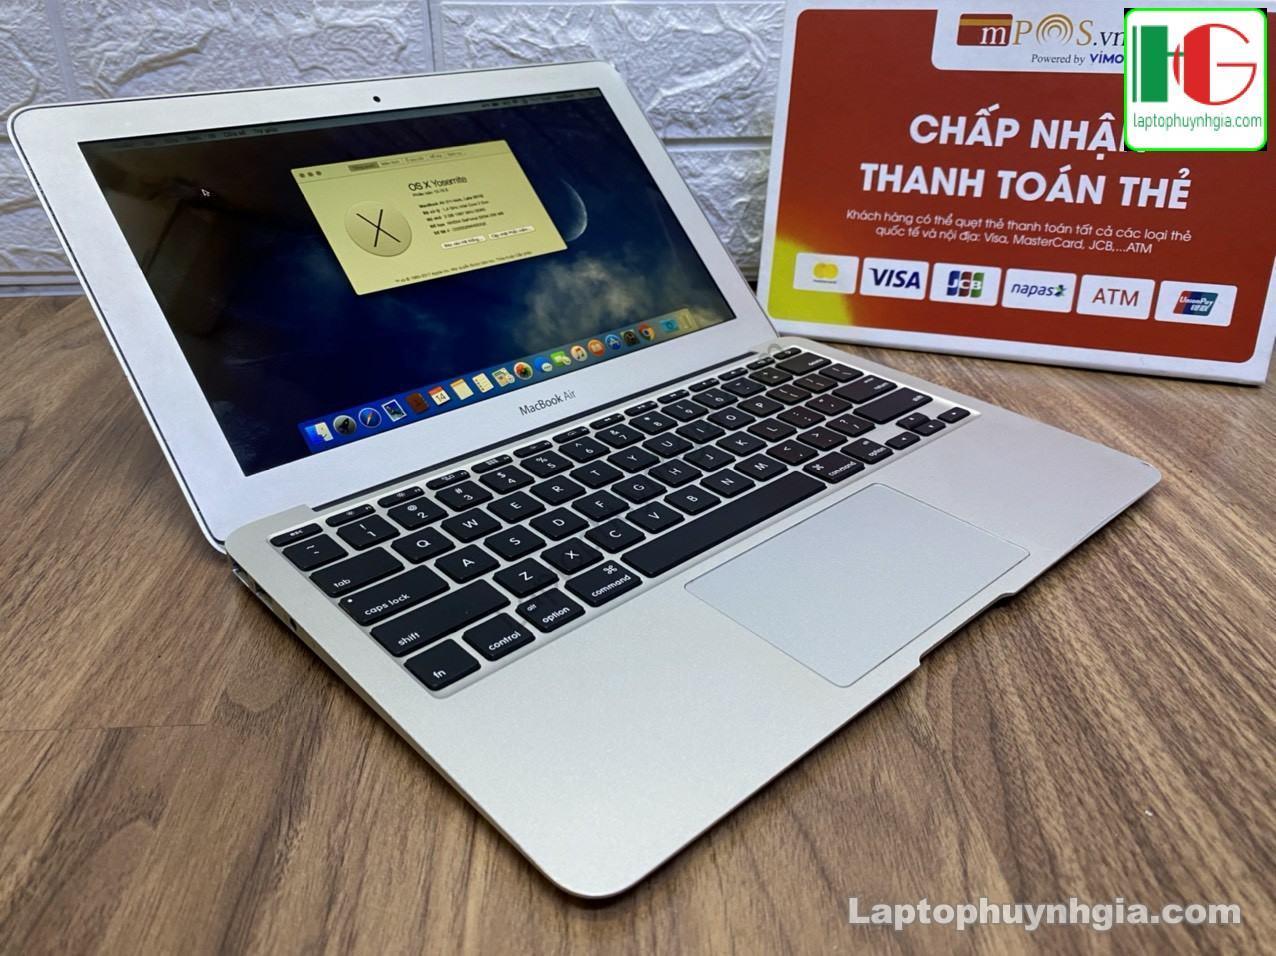 Macbook Air 2010 Core 2 Ram 2g Ssd 60g Lcd 11 Inh Laptophuynhgia.com 5